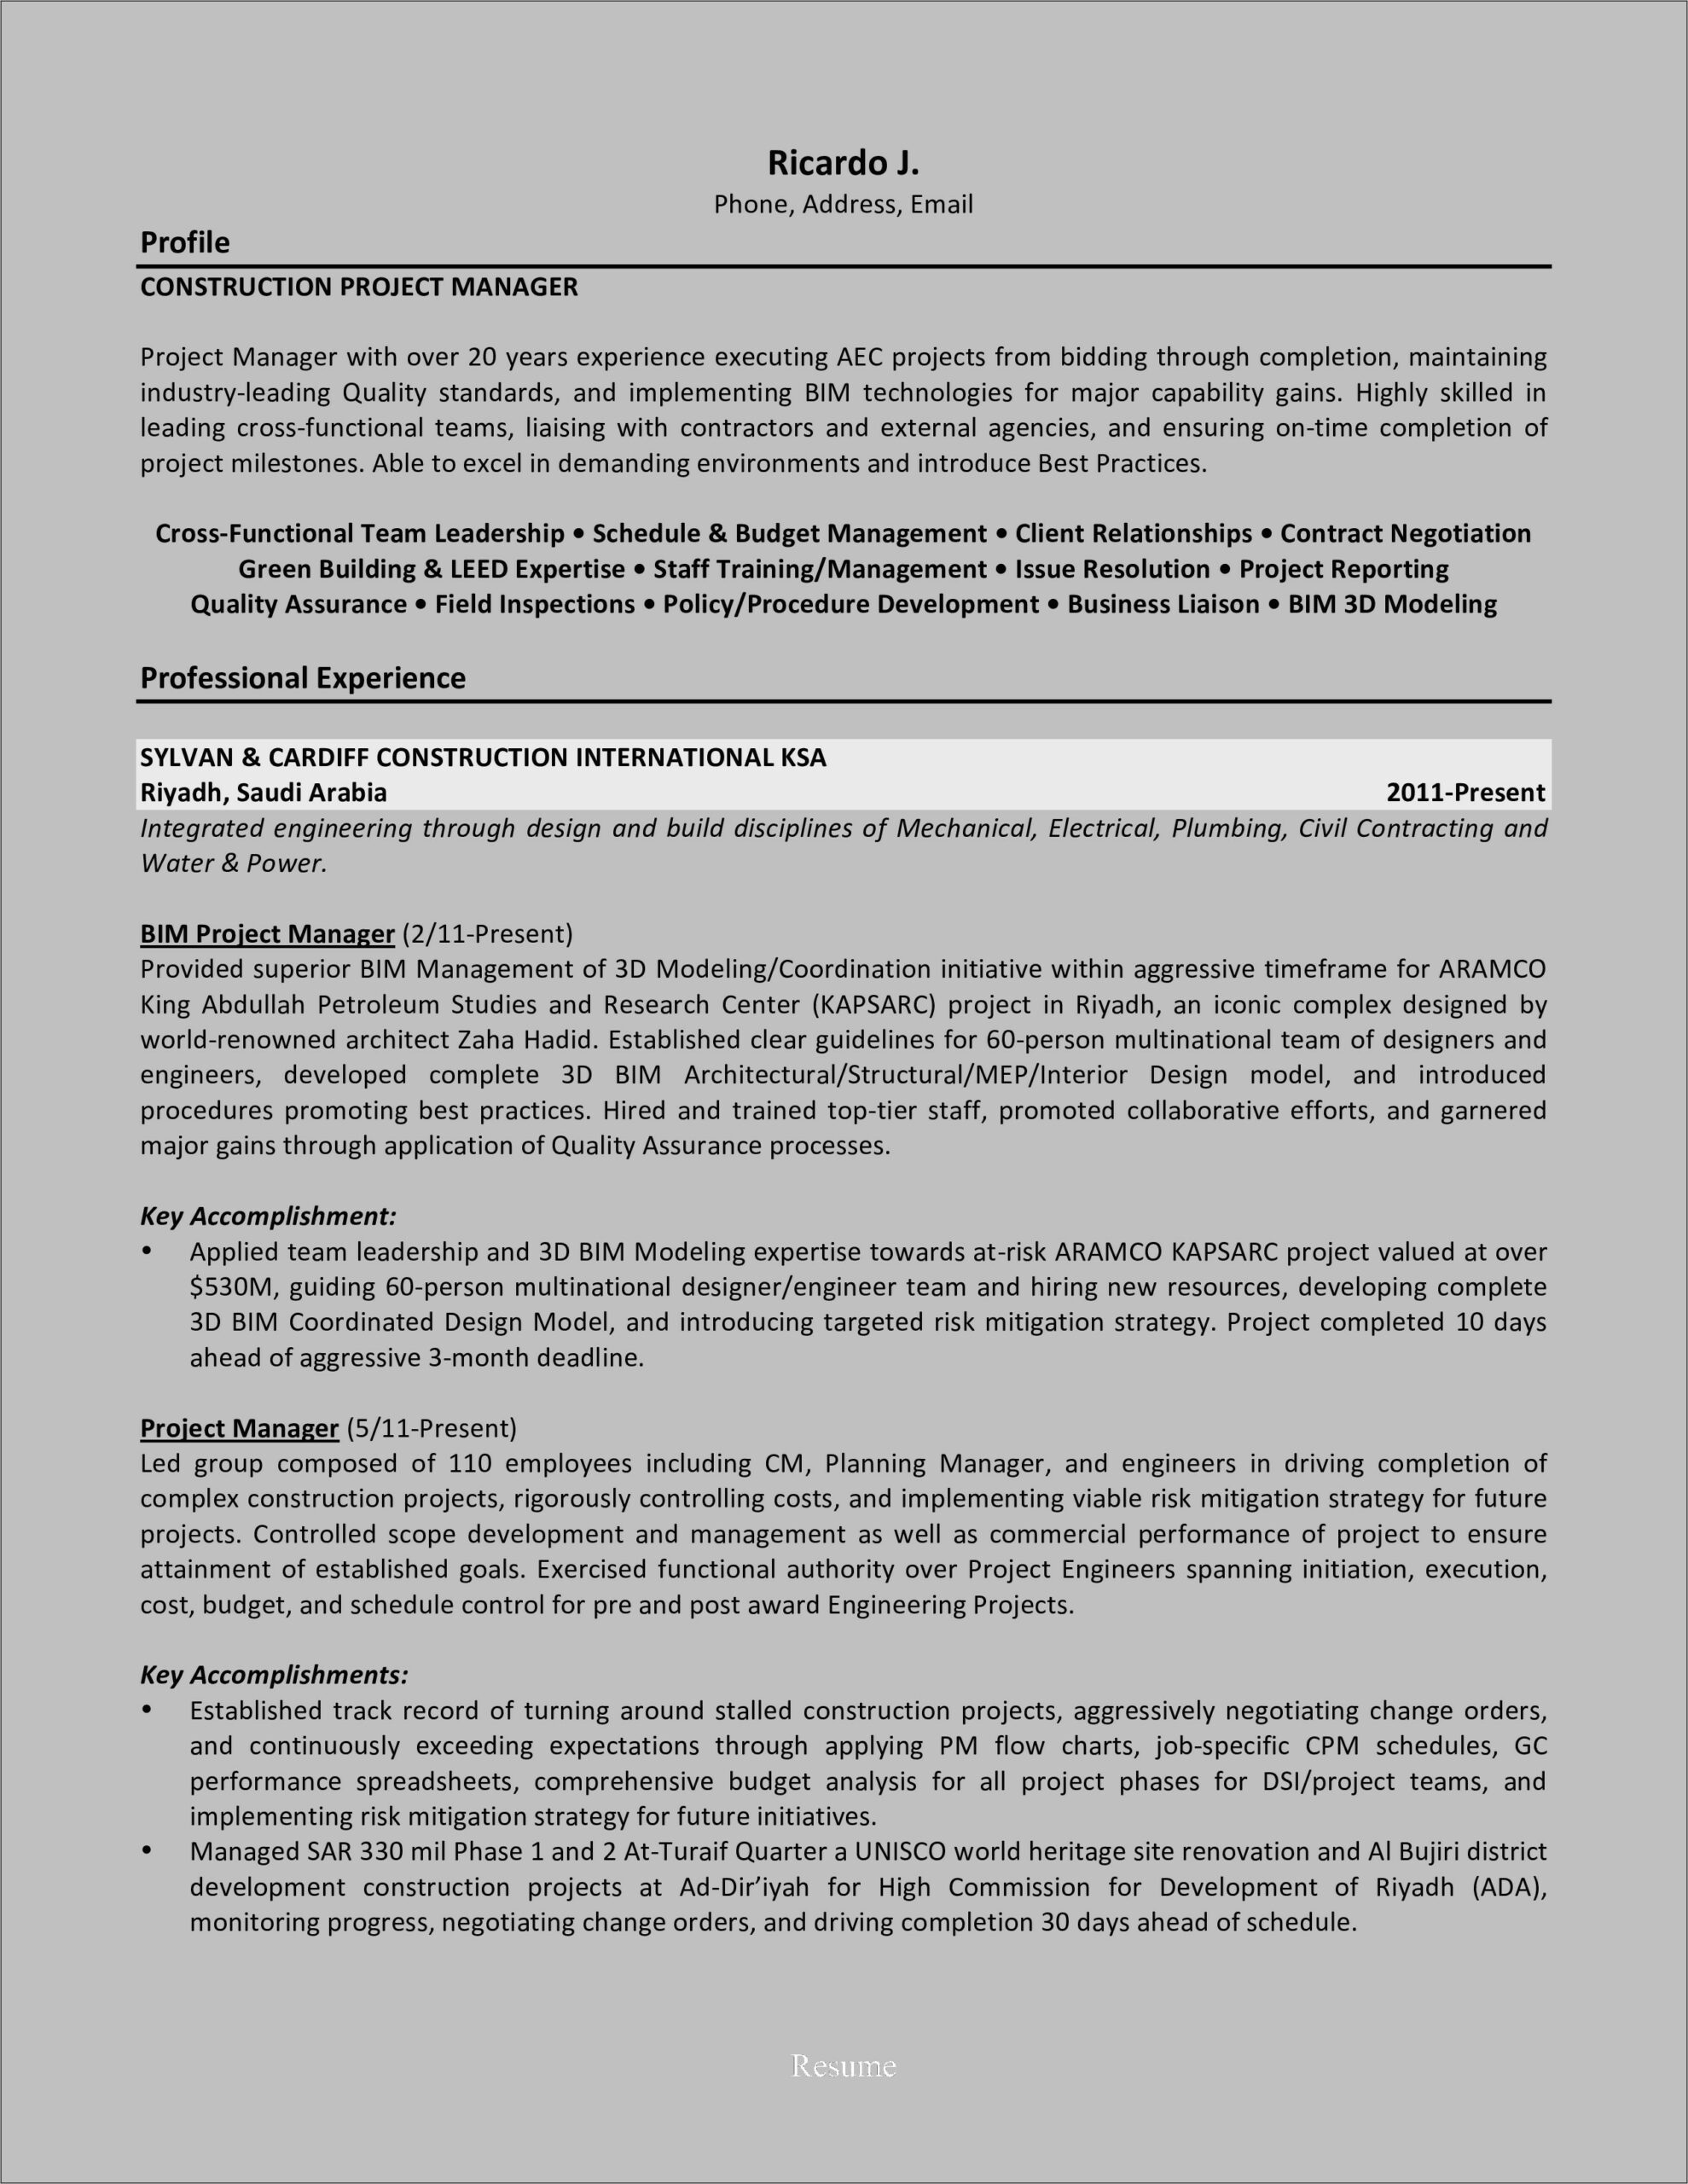 Resume Examples For Project Engineer